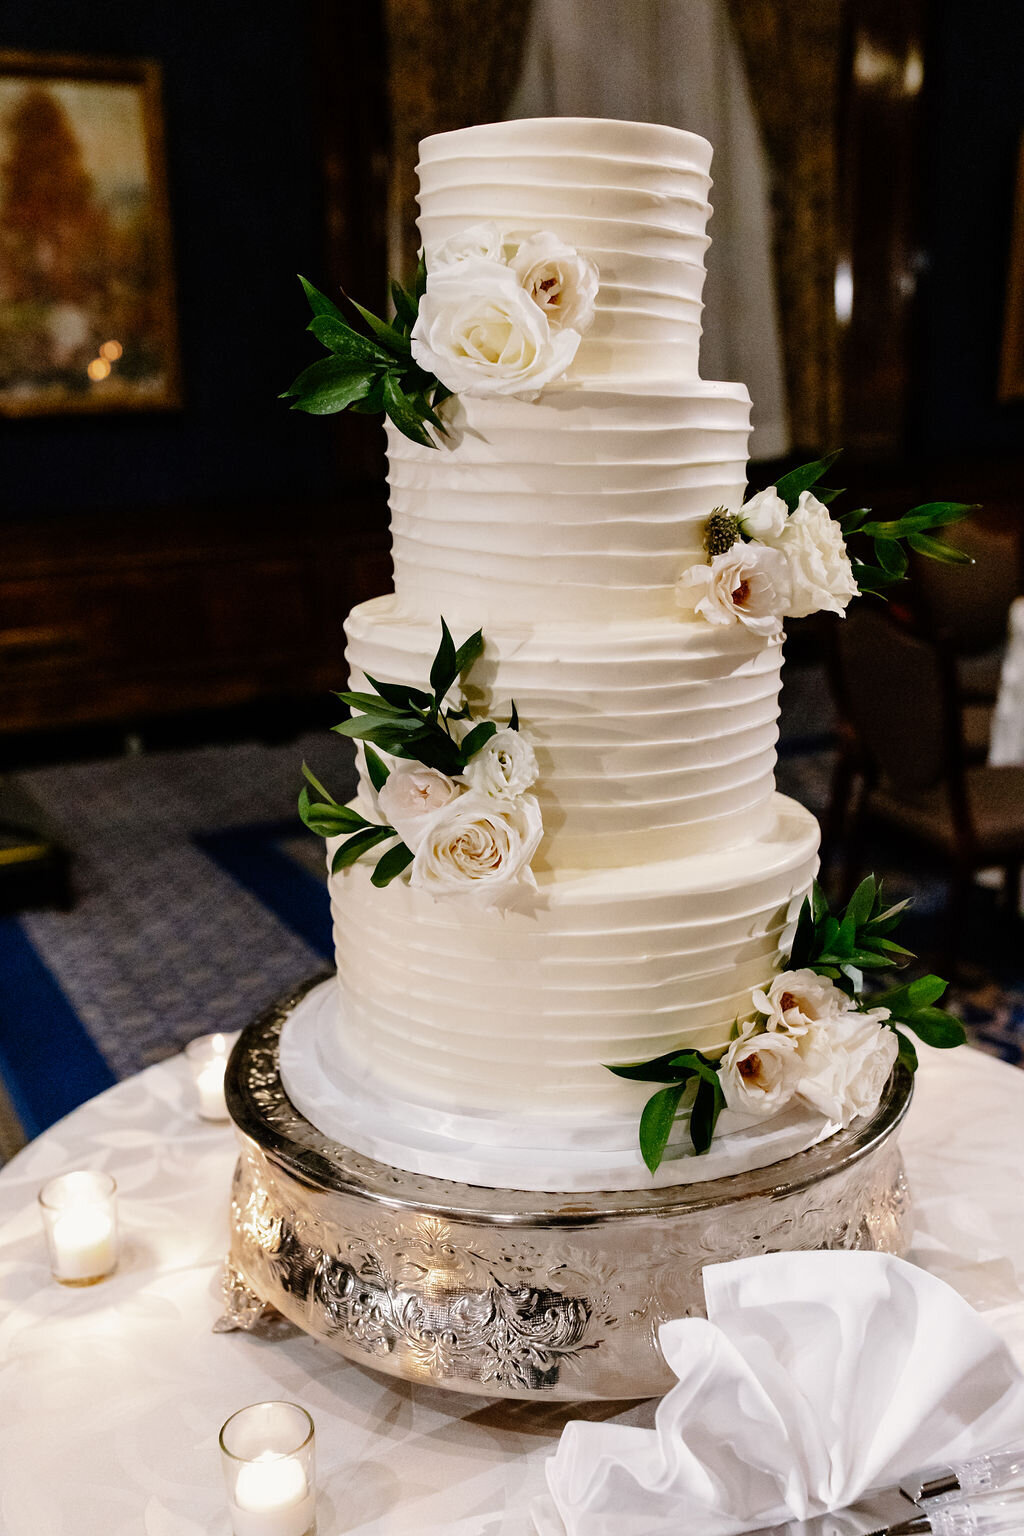 hA four-tier white wedding cake decorated with delicate white roses and green leaves sits on table at wedding reception in Chicago.